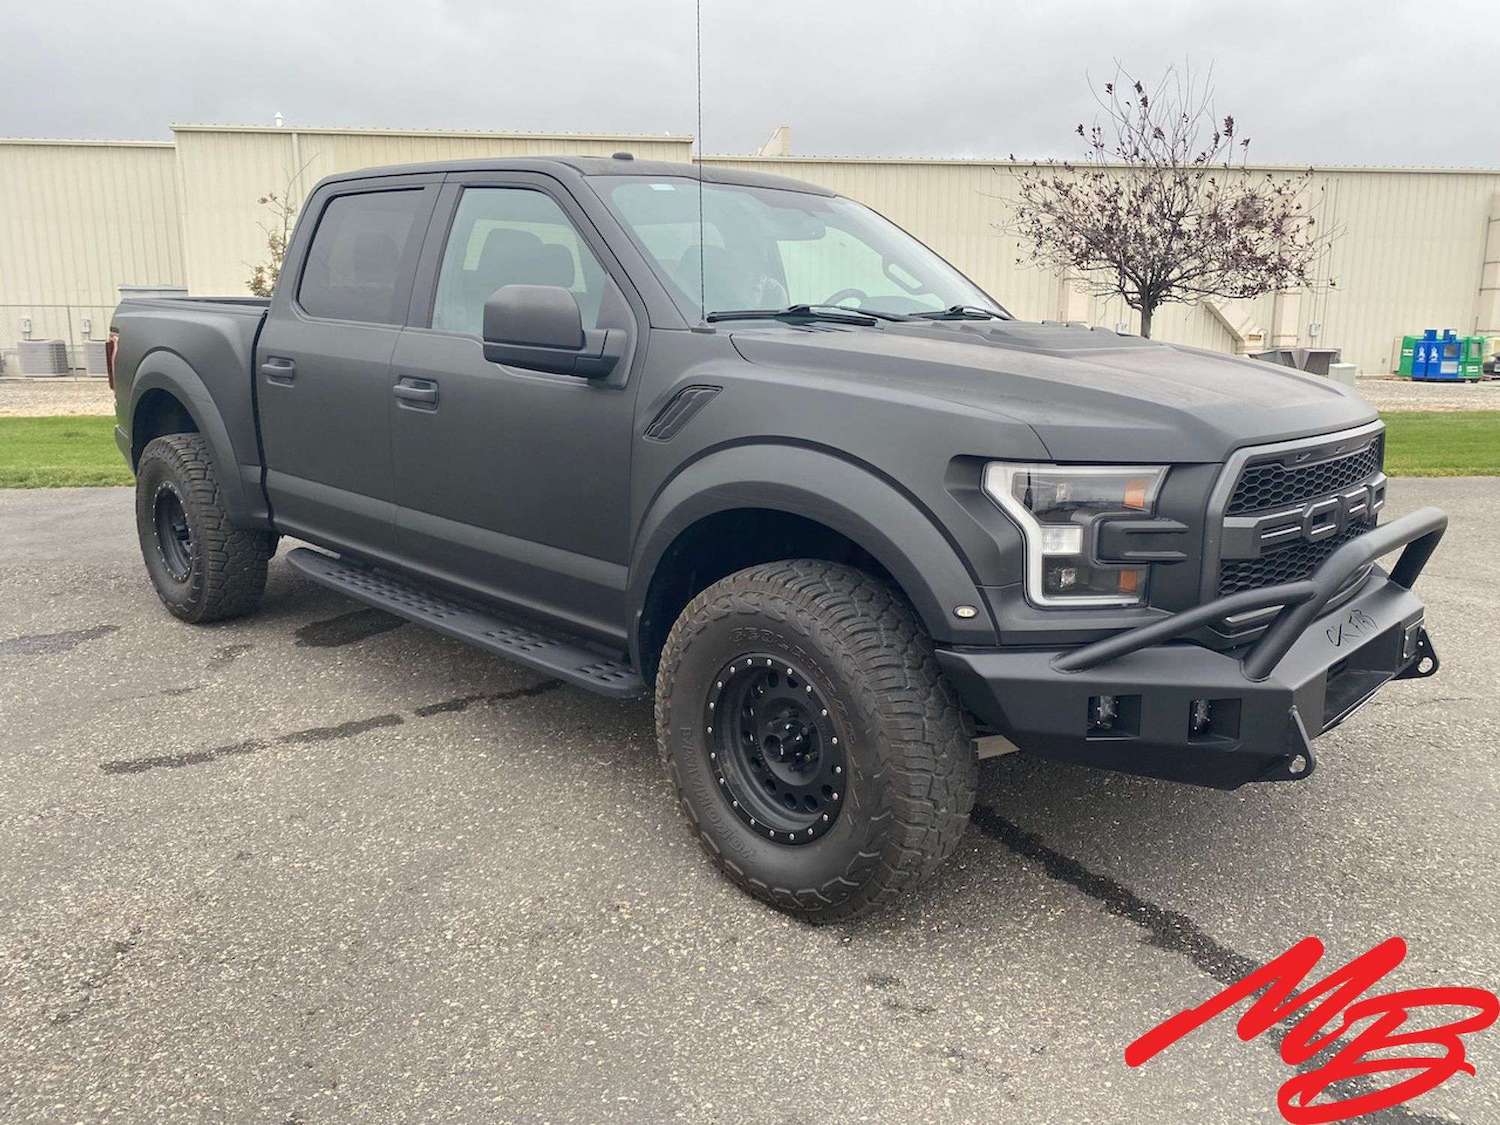 Kanye West's 2018 Ford F-150 Raptor 4x4 SuperCrew from Cody, Wyoming now up for auction from Musser Bros.